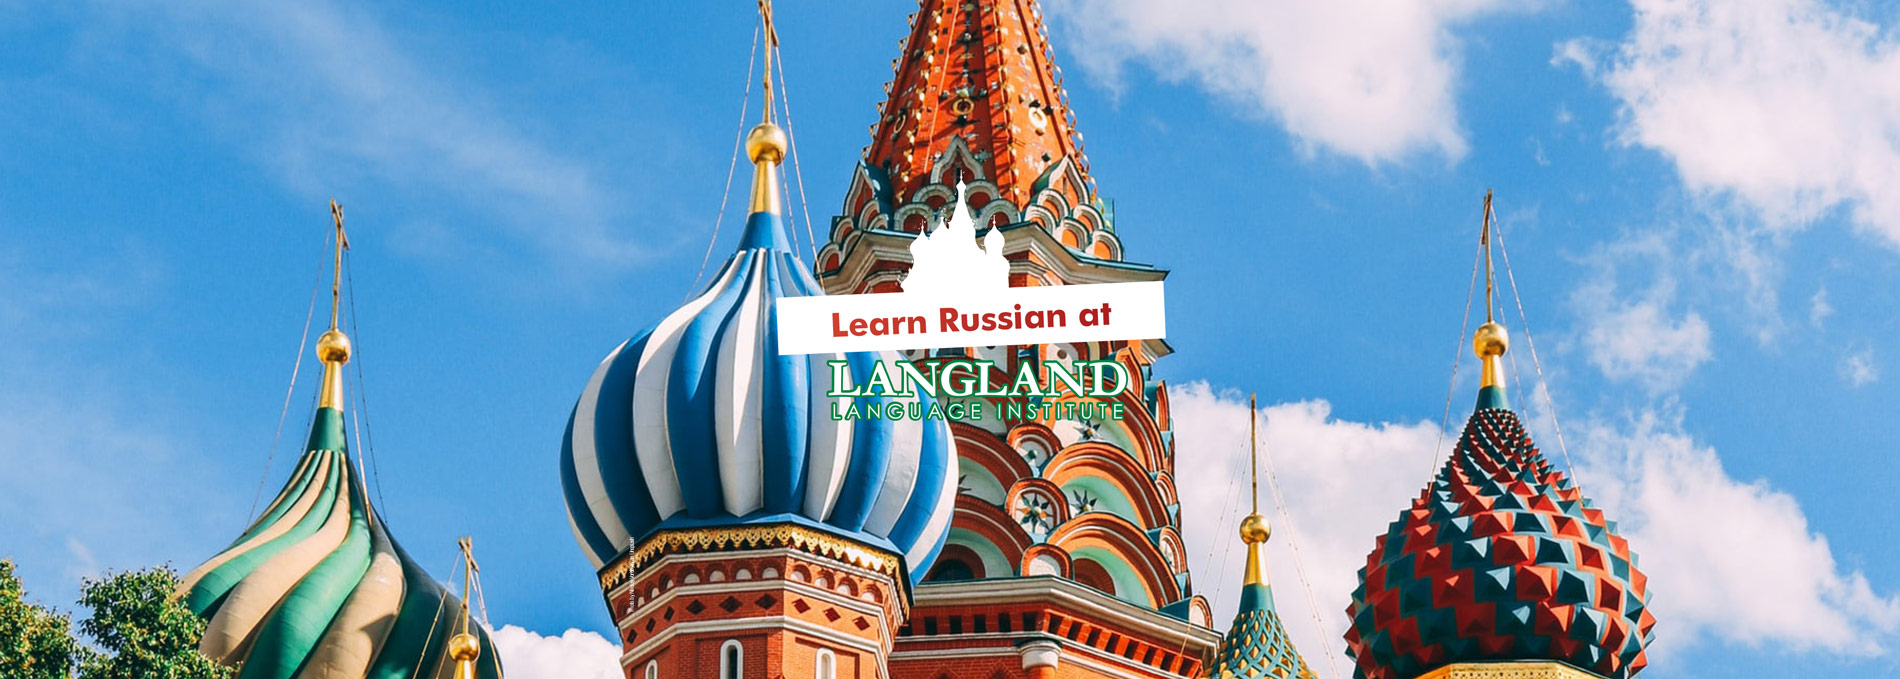 Learn-Russian-at-Langland